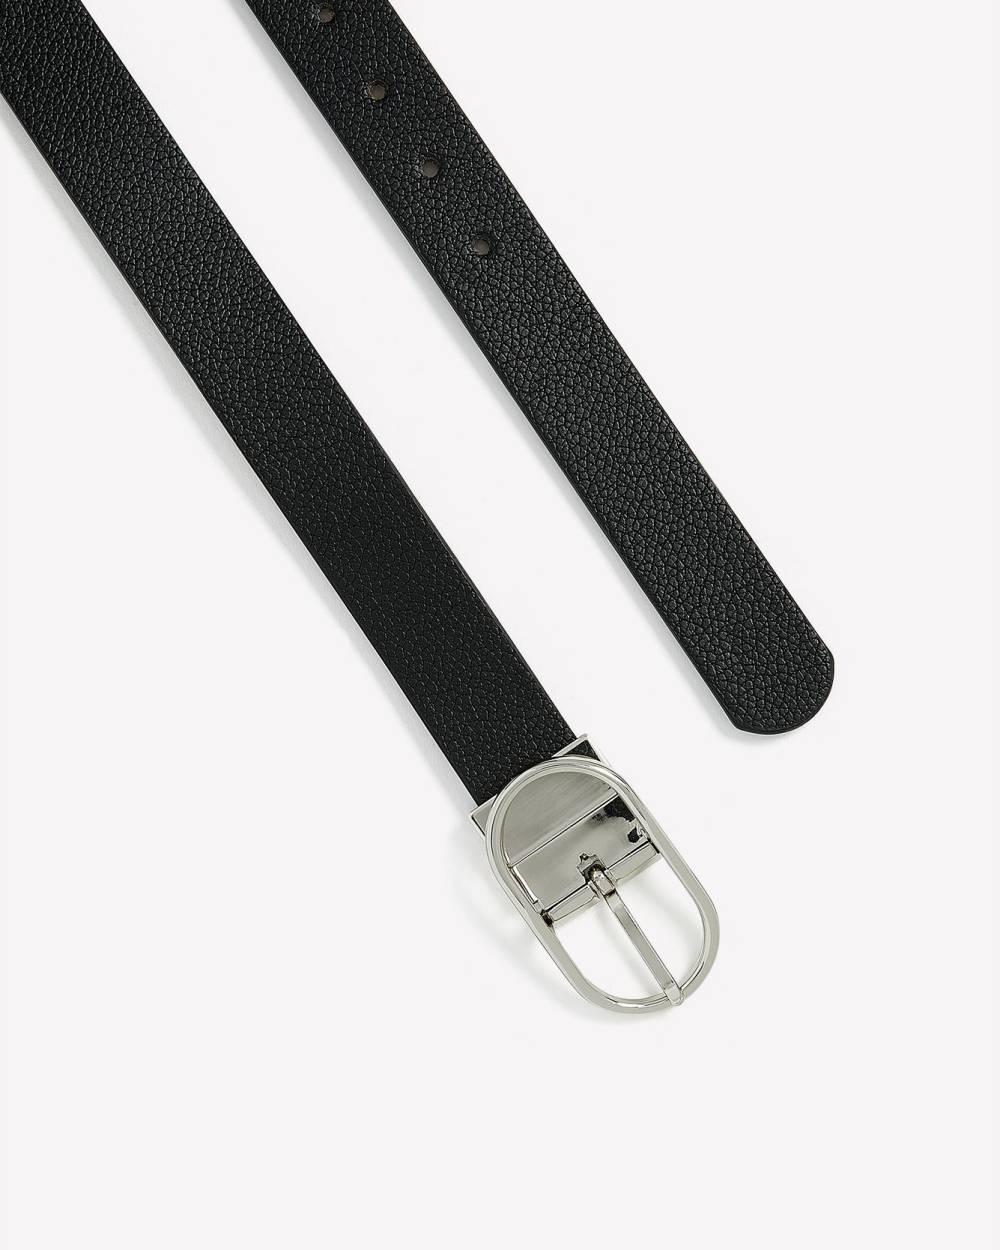 Reversible Faux-Leather Belt with Oval Buckle | Penningtons